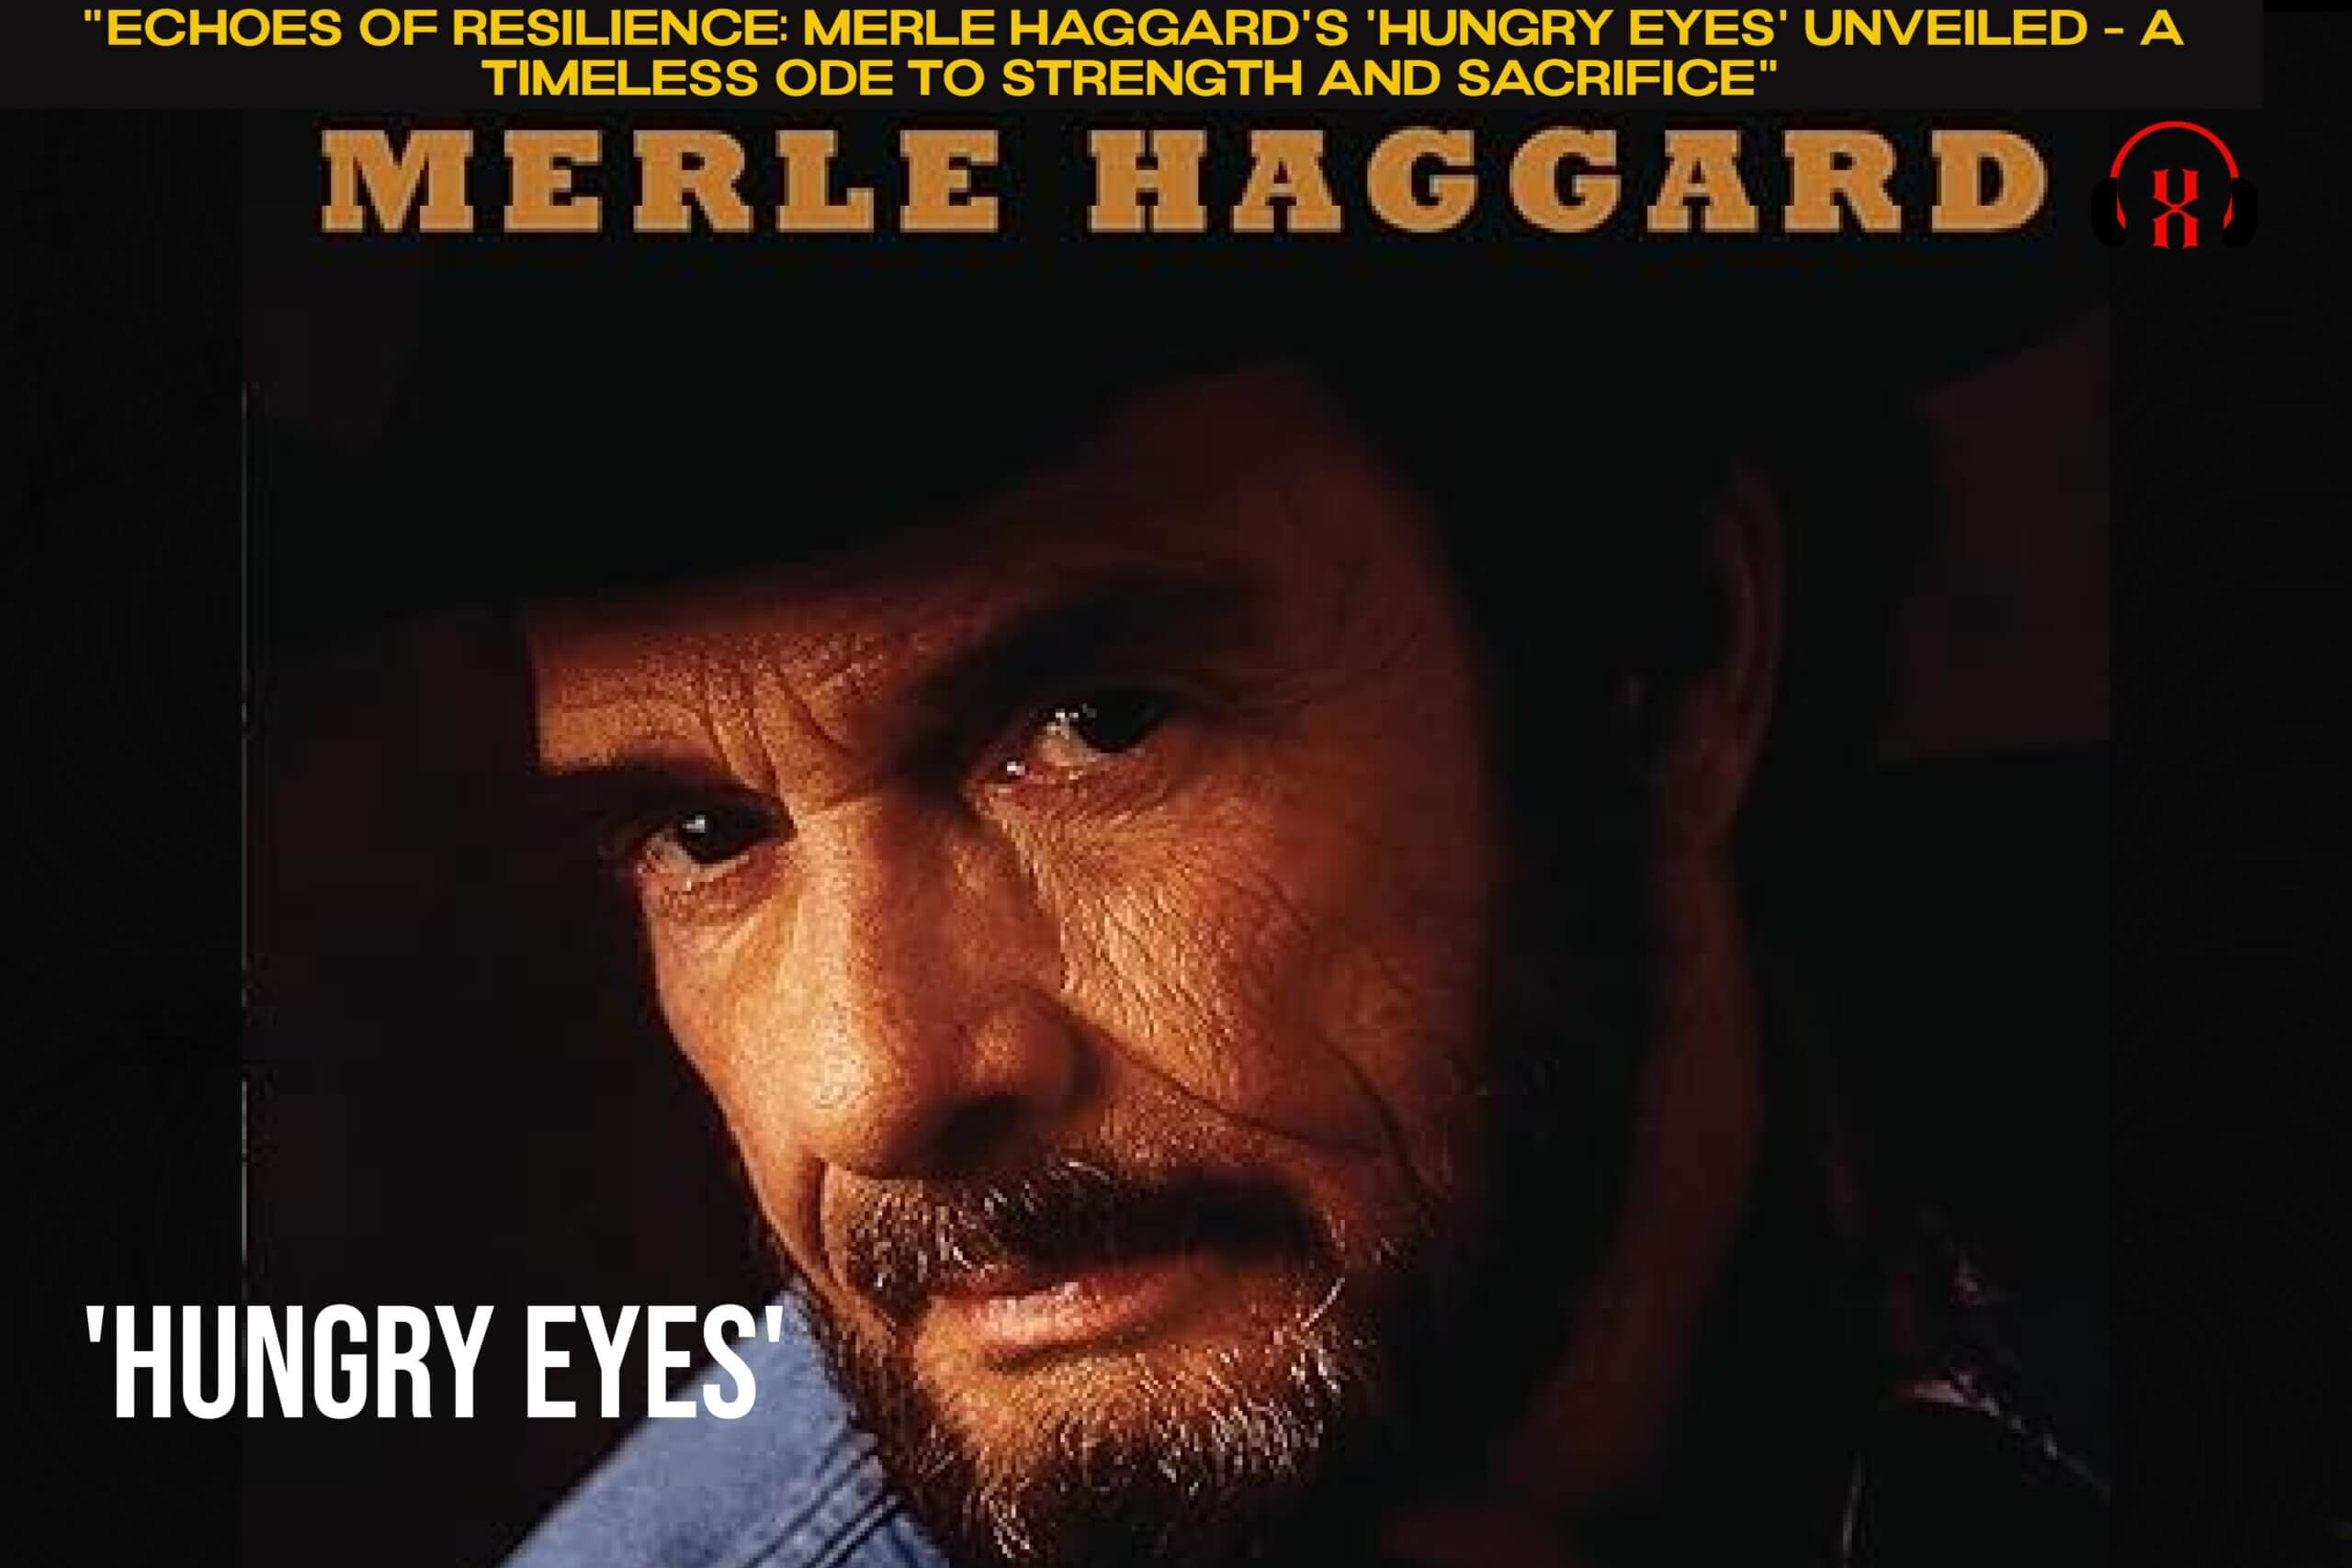 “Echoes of Resilience: Merle Haggard’s ‘Hungry Eyes’ Unveiled – A Timeless Ode to Strength and Sacrifice”